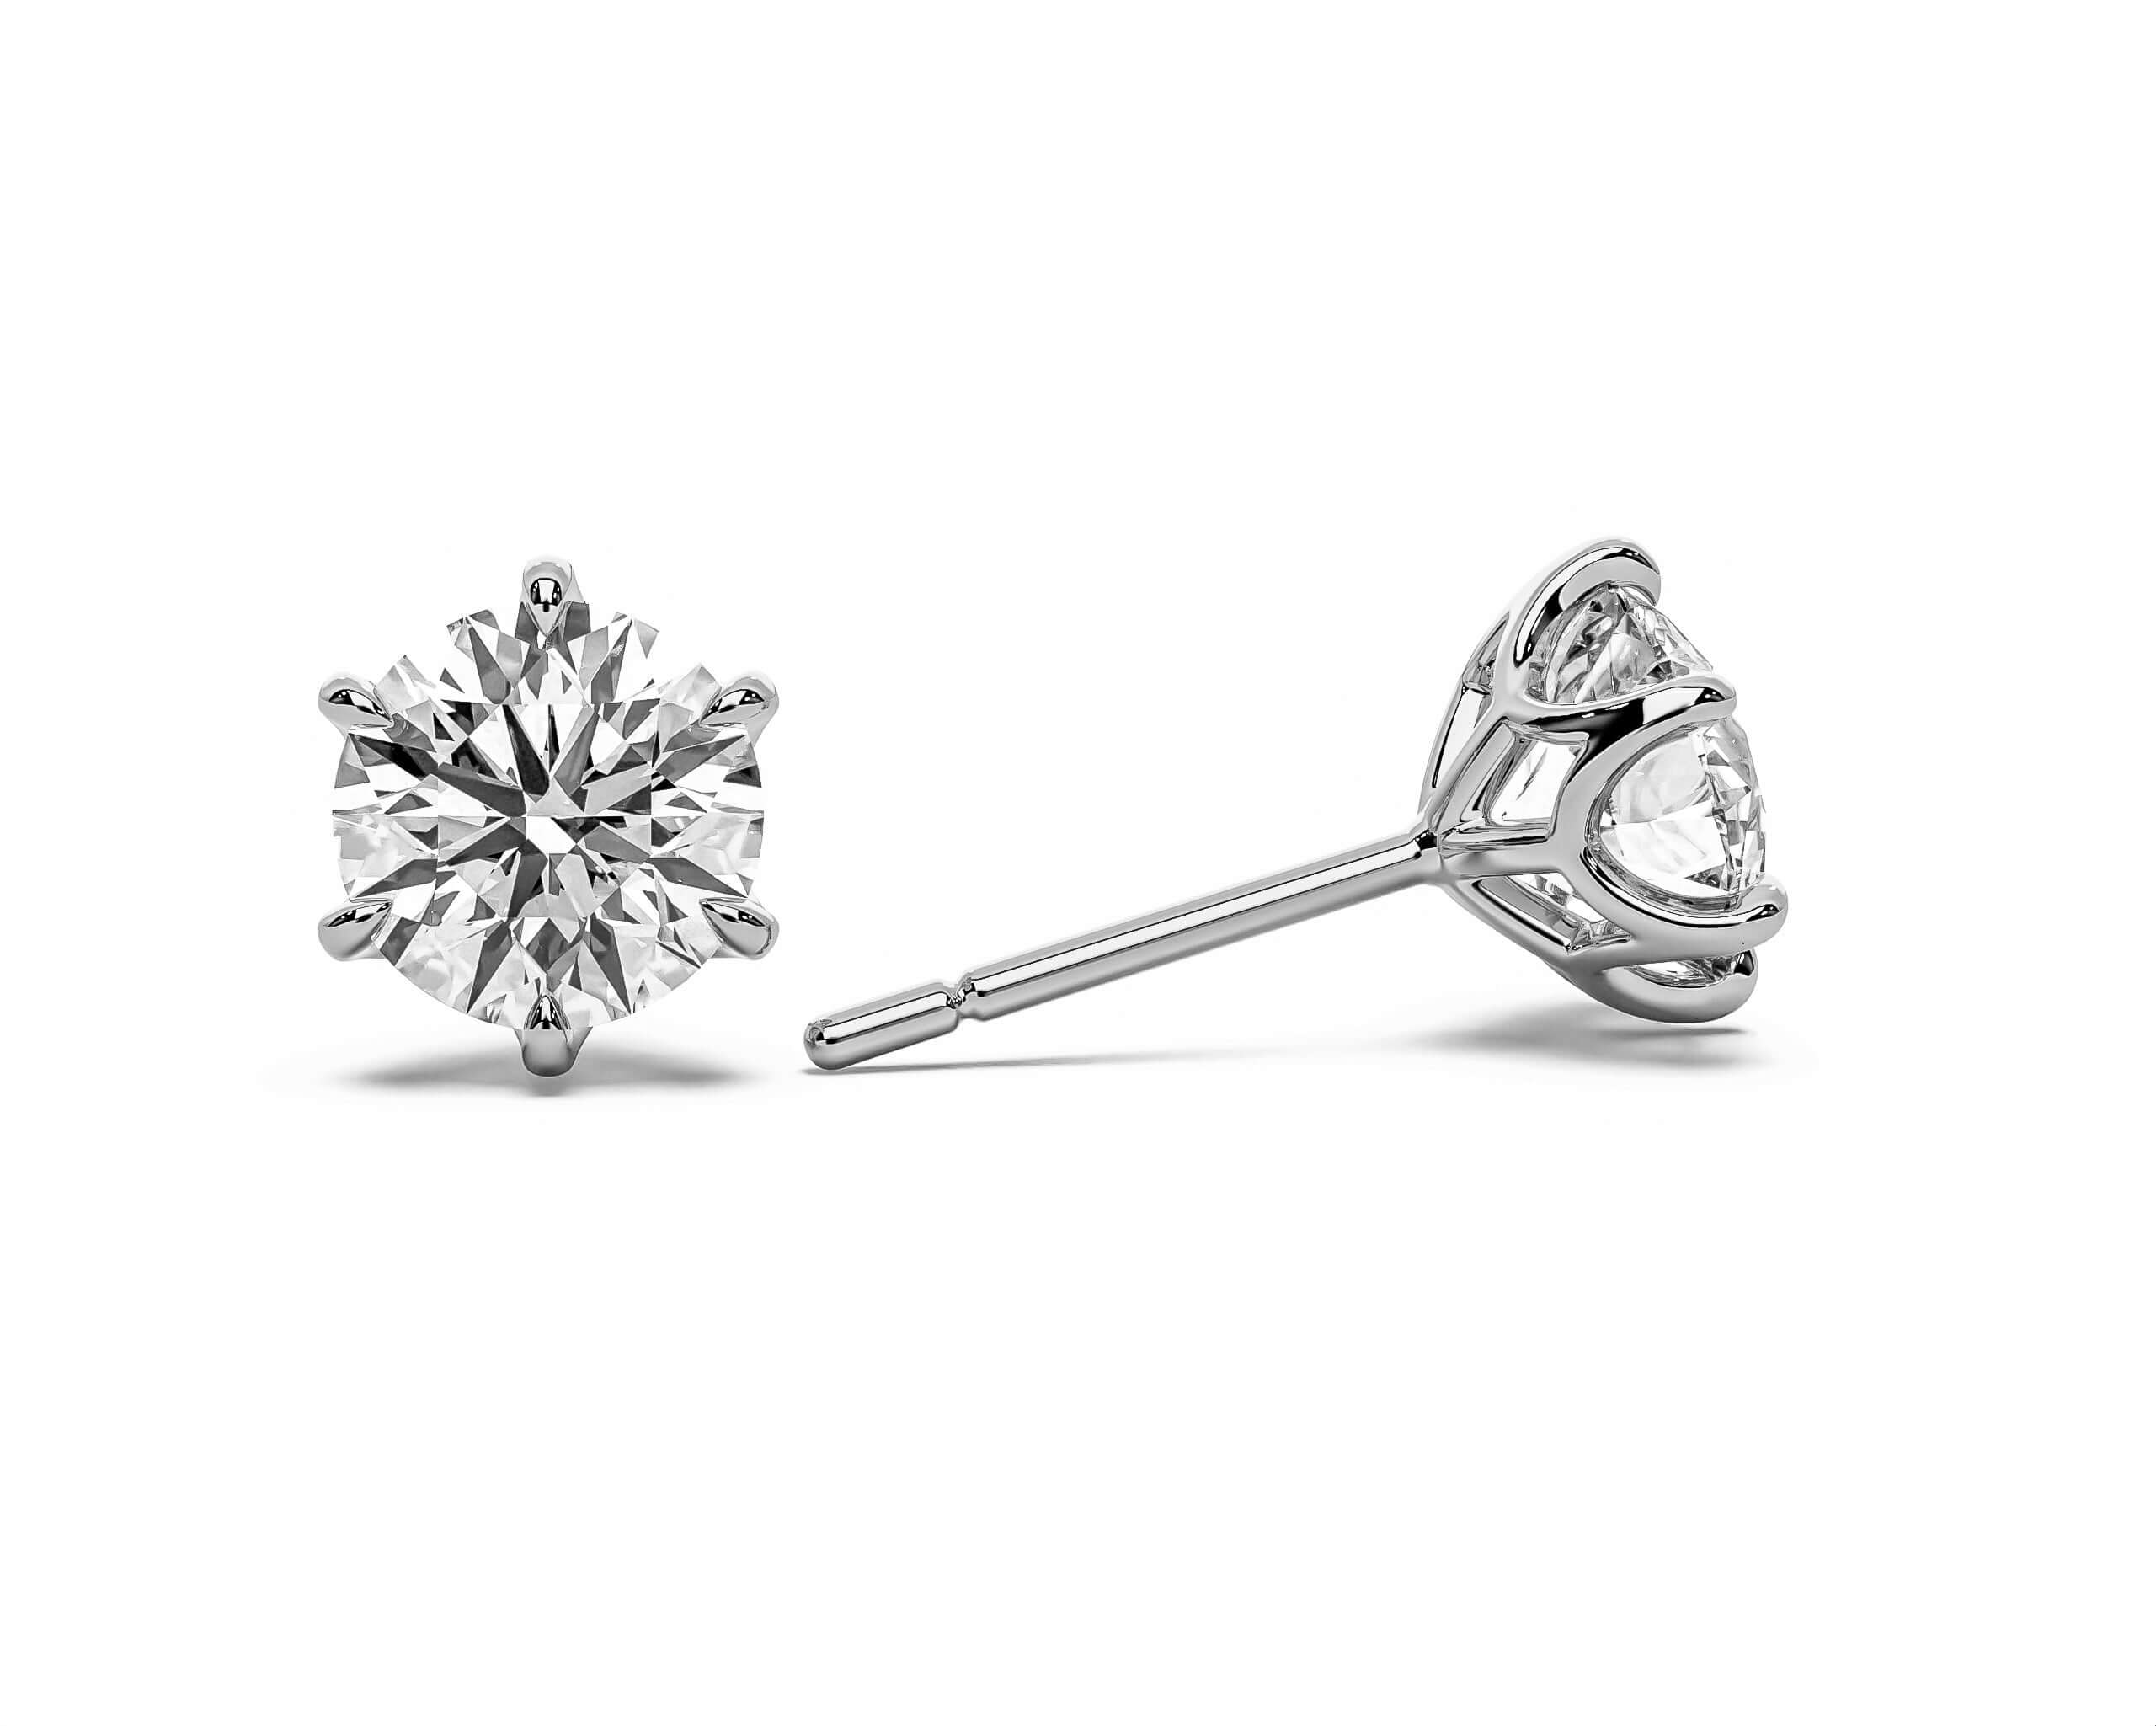 LAB LUXE - Round brilliant six claw Lab grown diamond earrings